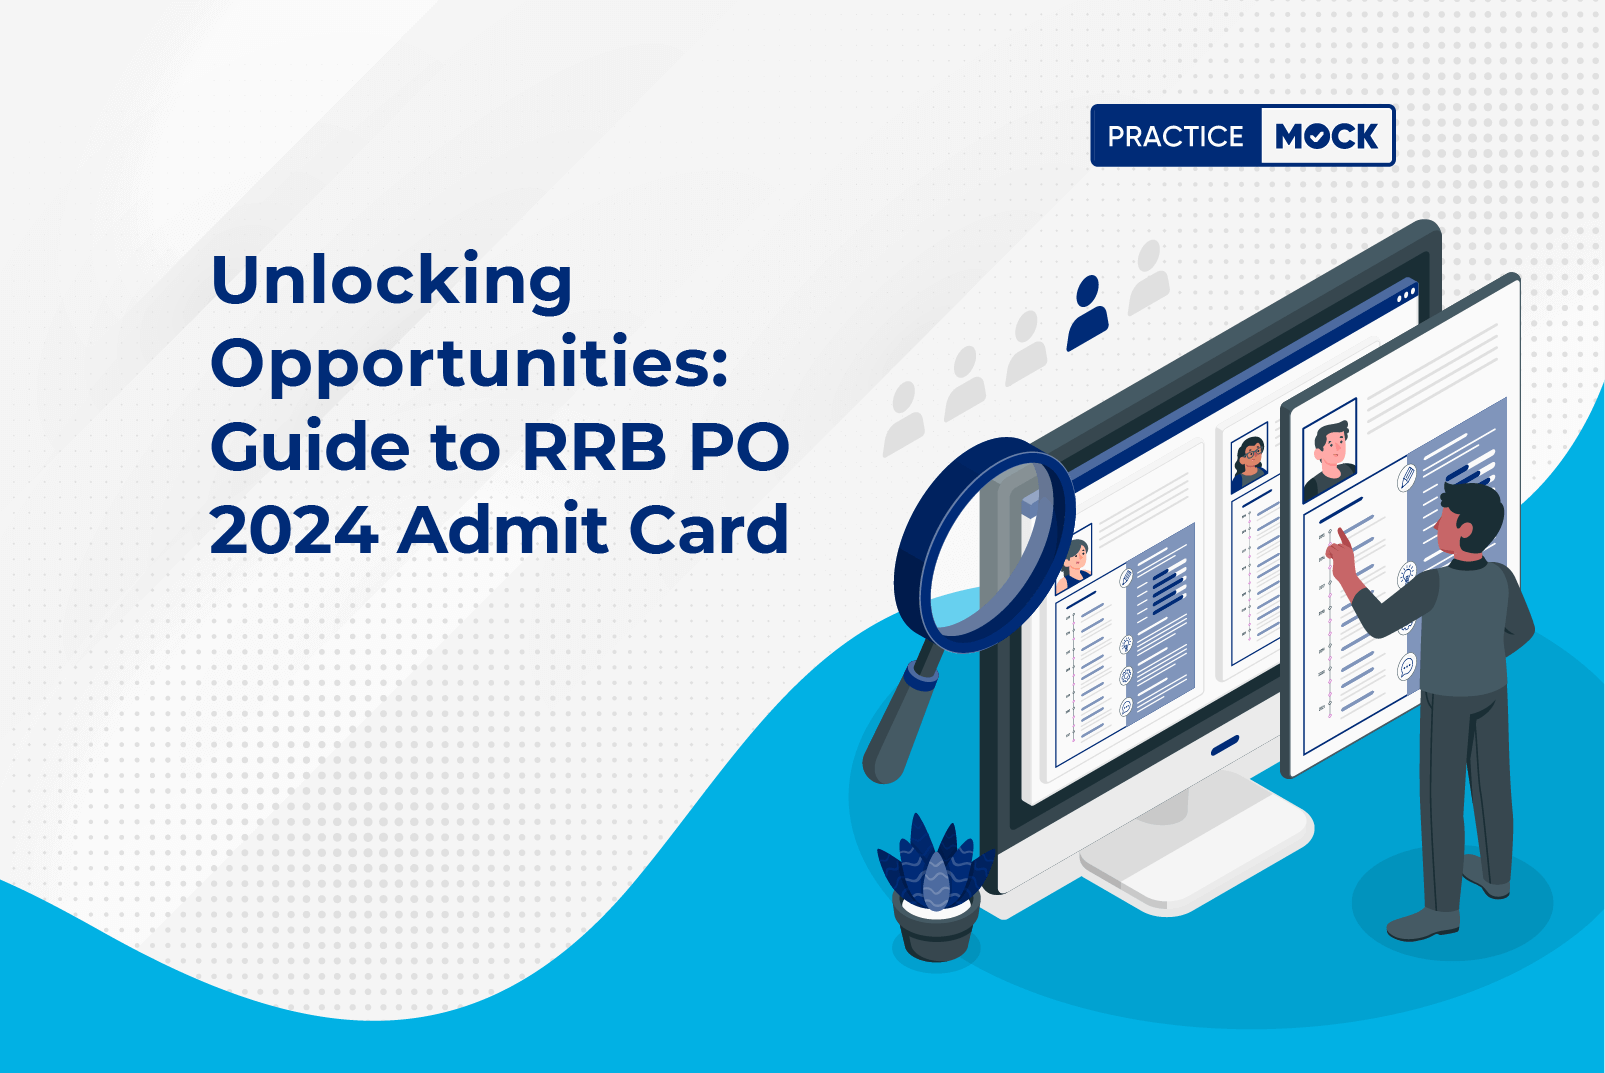 Unlocking Opportunities: Guide to RRB PO 2024 Admit Card